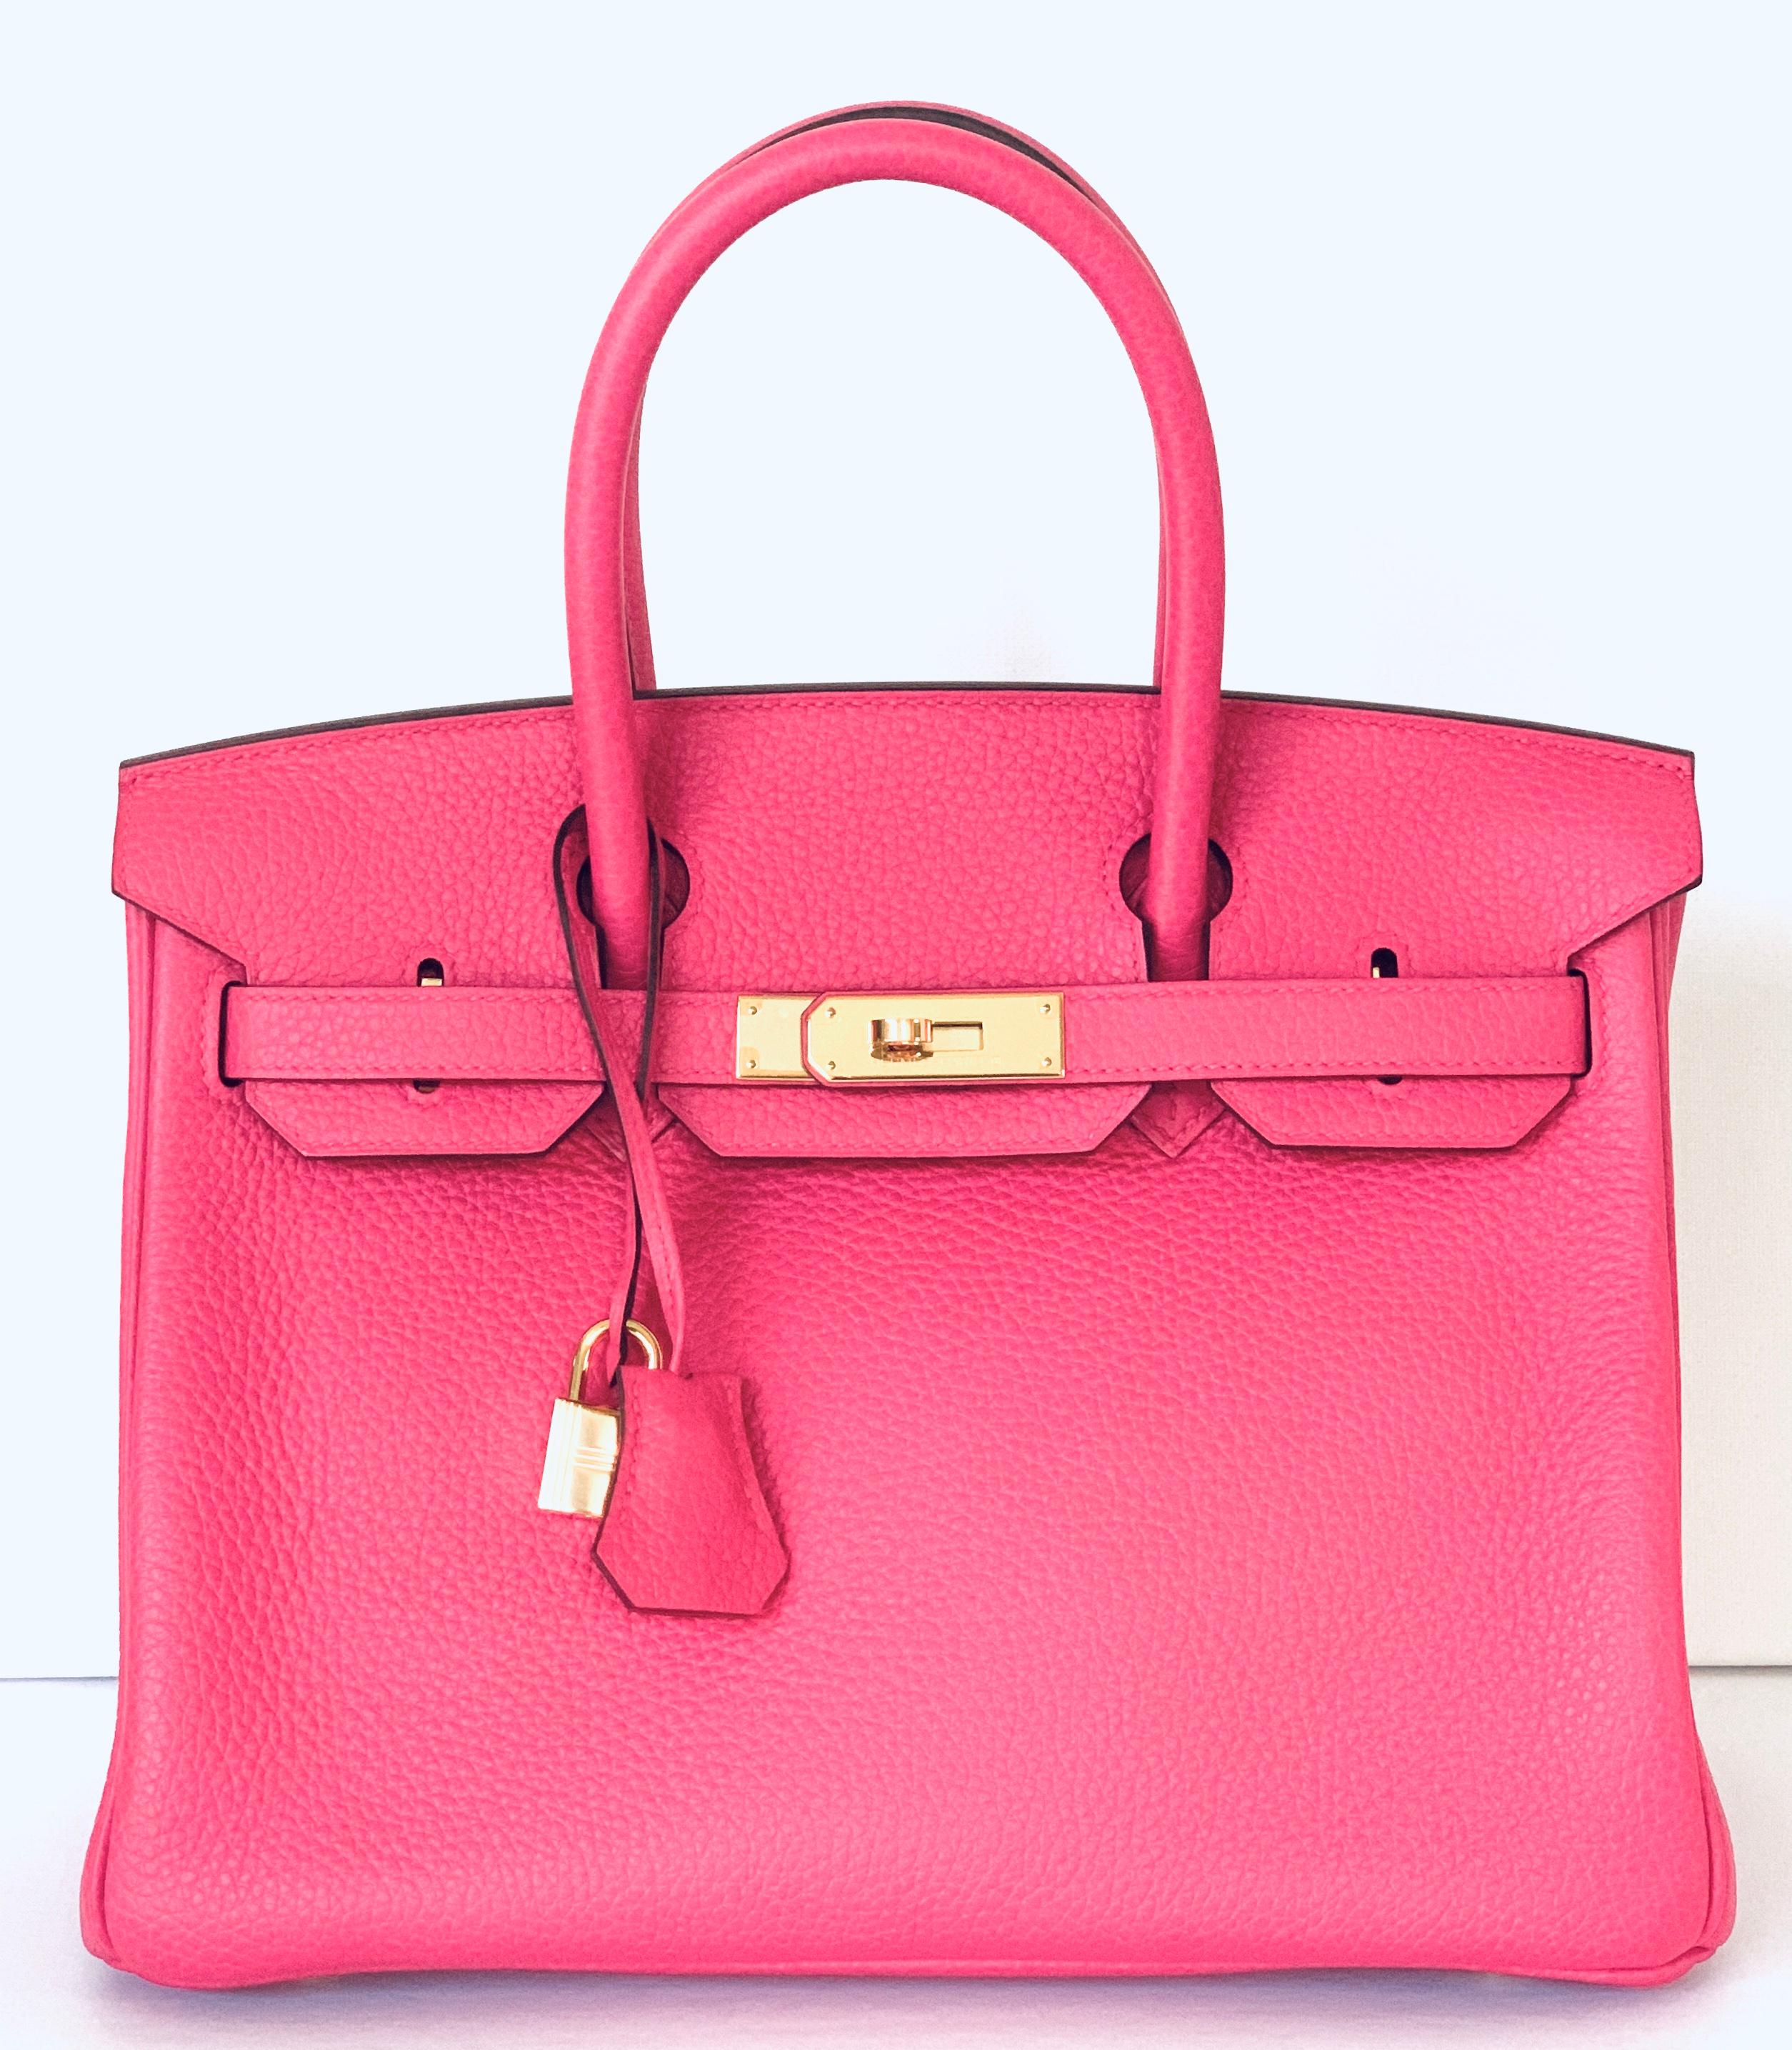 Hermès Rose Extreme  Birkin 30cm Gold Hardware
New Color Rose Extreme Pink
Taurillon Clemence leather
Gold Hardware
Stunning new Birkin
This new color is amazing done in Clemence leather! So brilliant!
Tonal stitching, two straps with front toggle